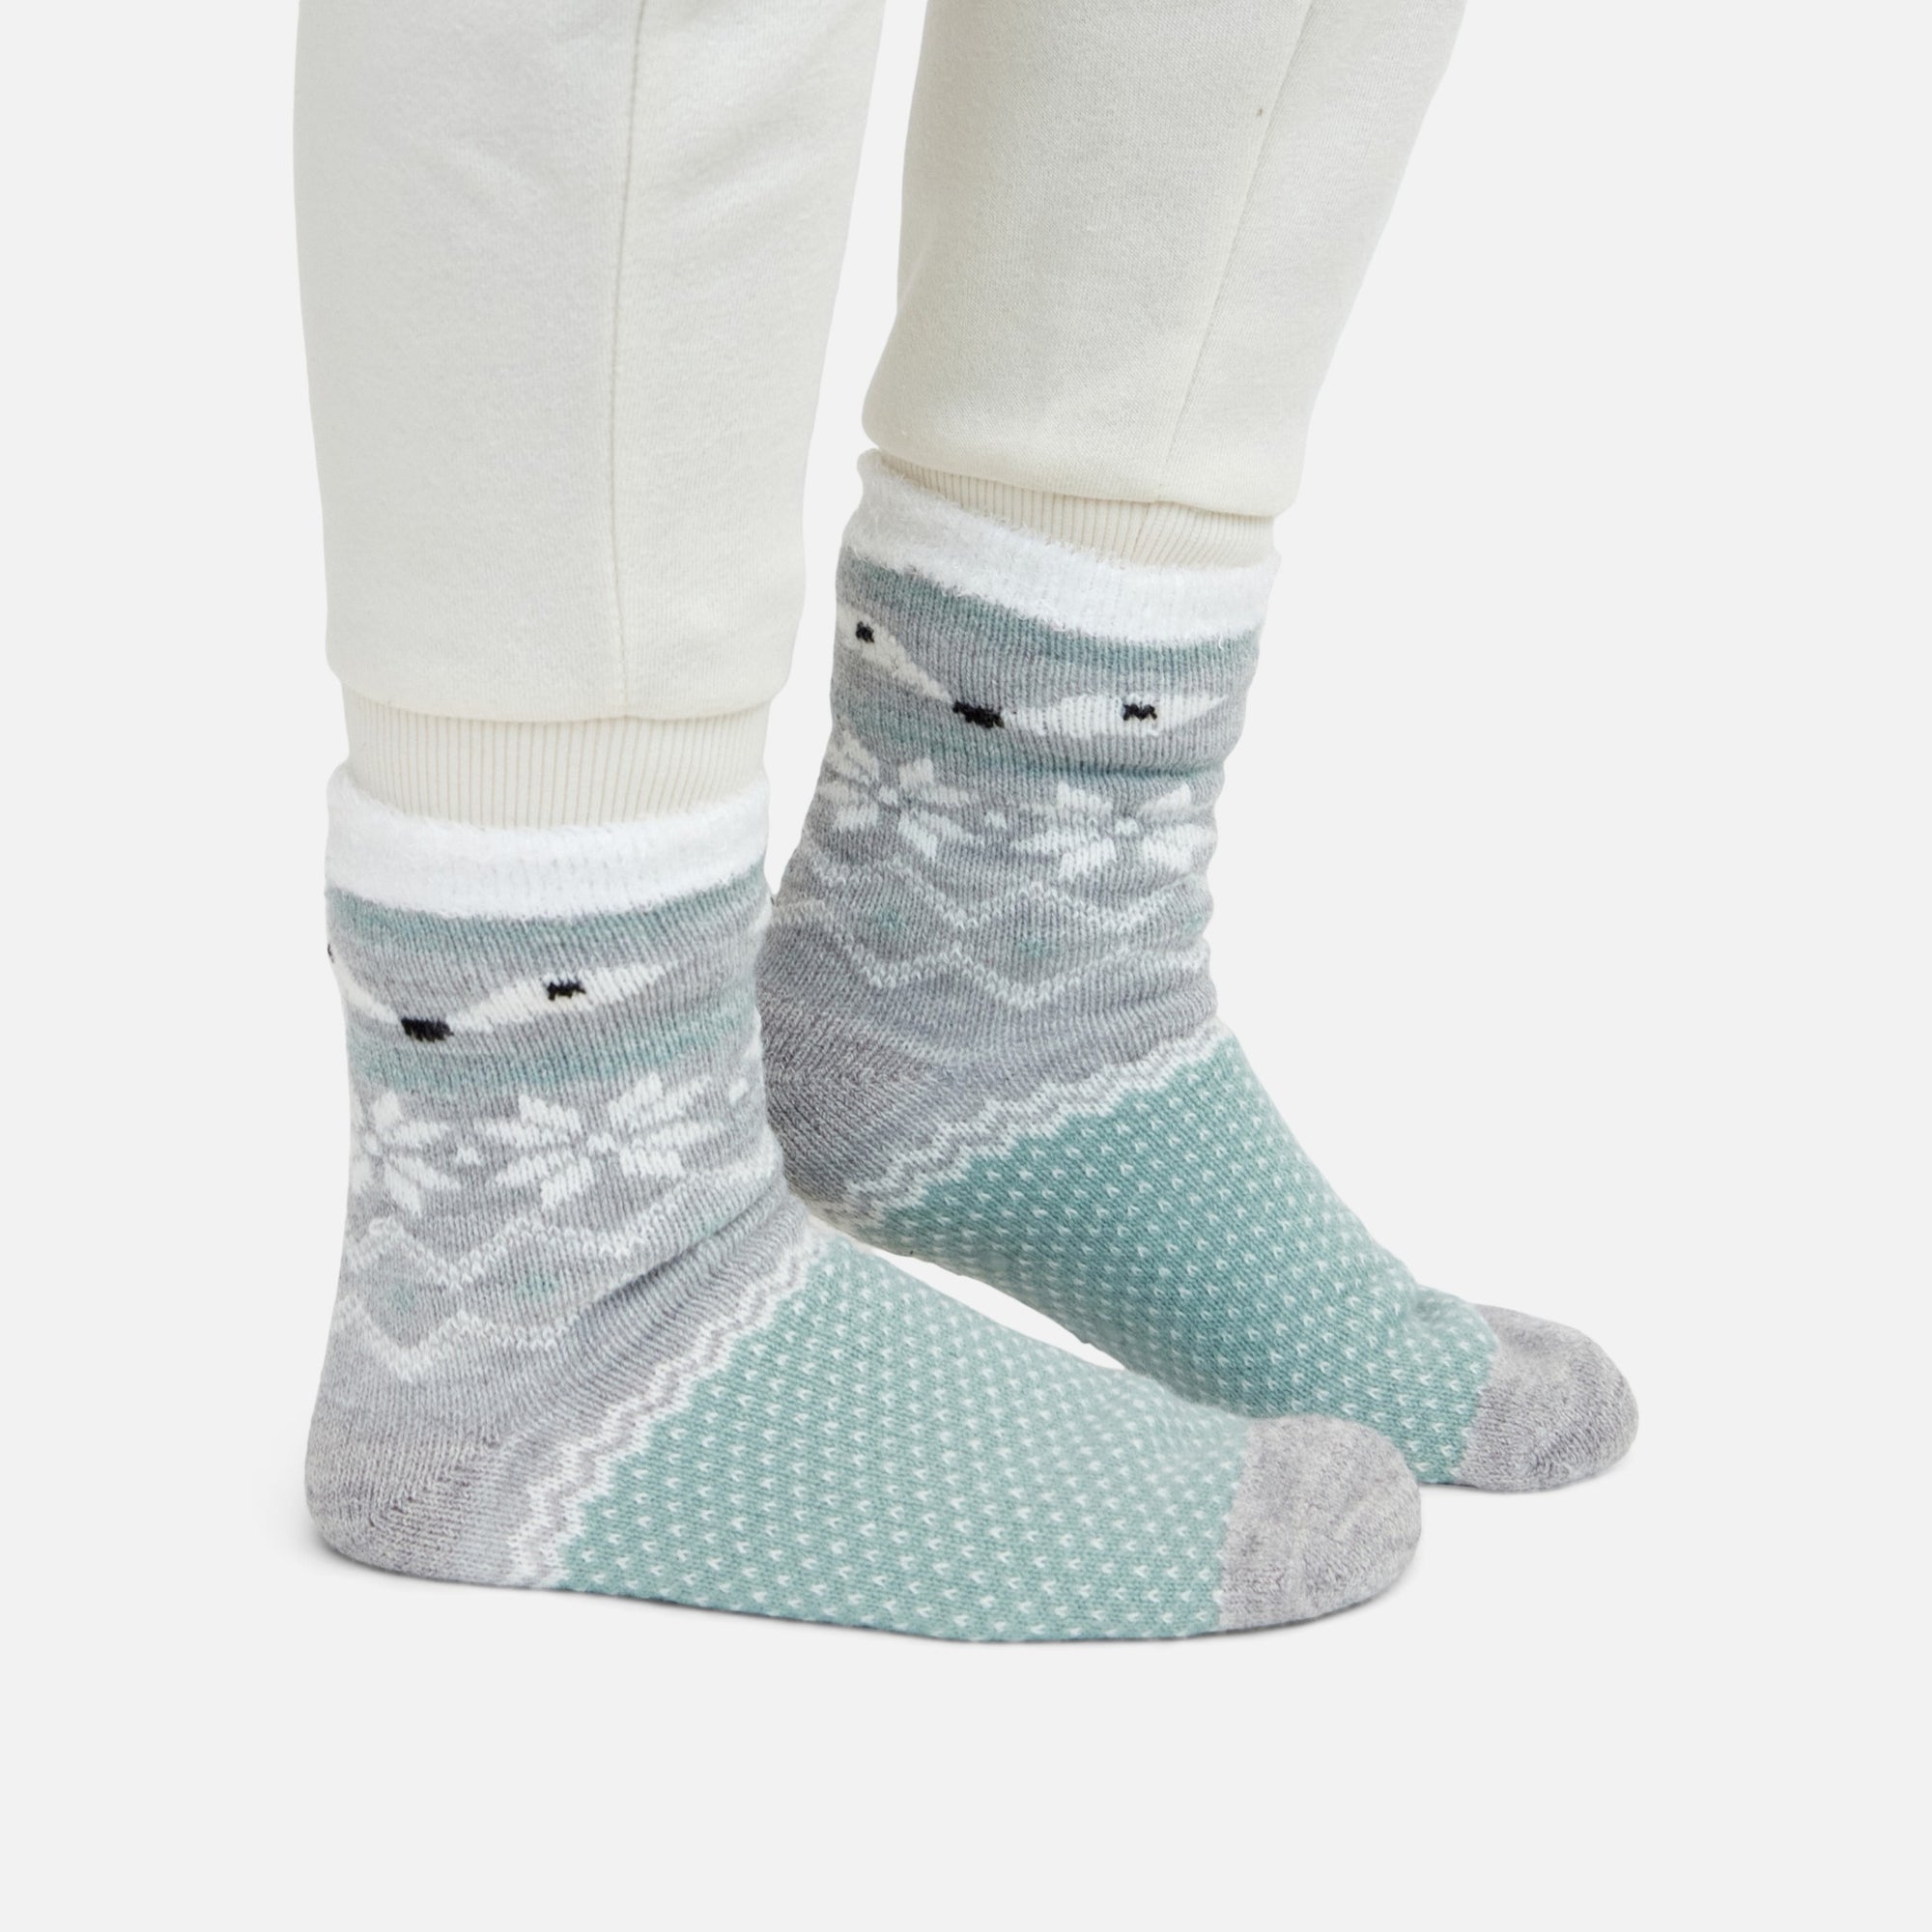 Grey cozy socks with norwegian patterns and fox faces